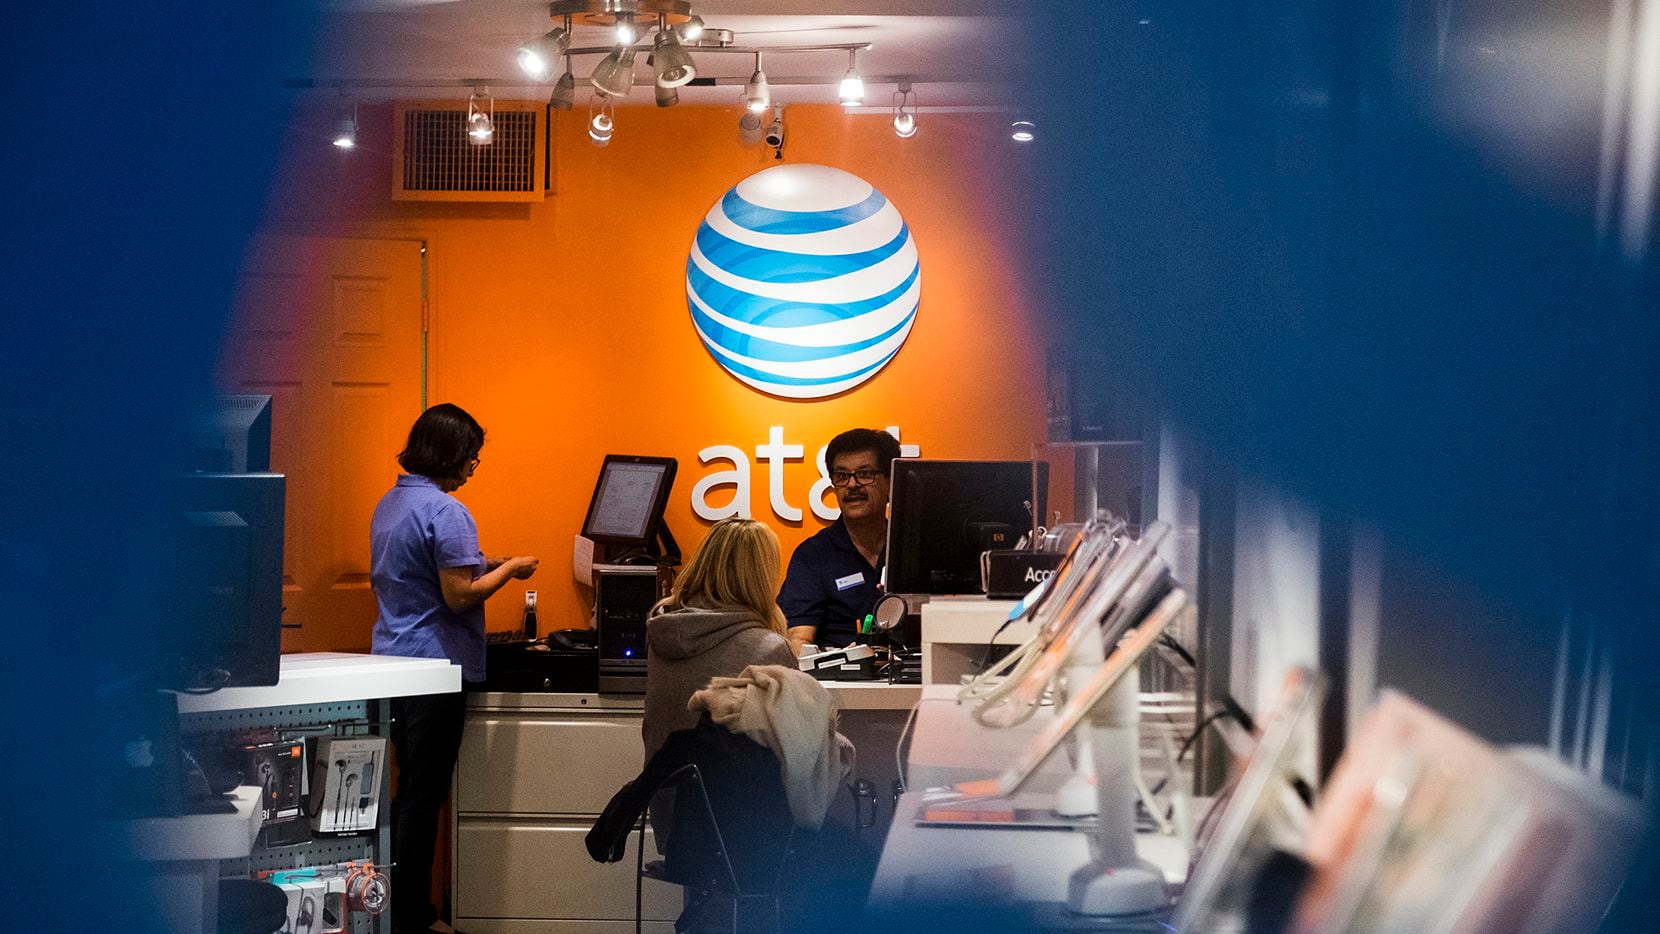 The Justice Department has sued to block the AT&T-Time Warner deal and the trial starts...